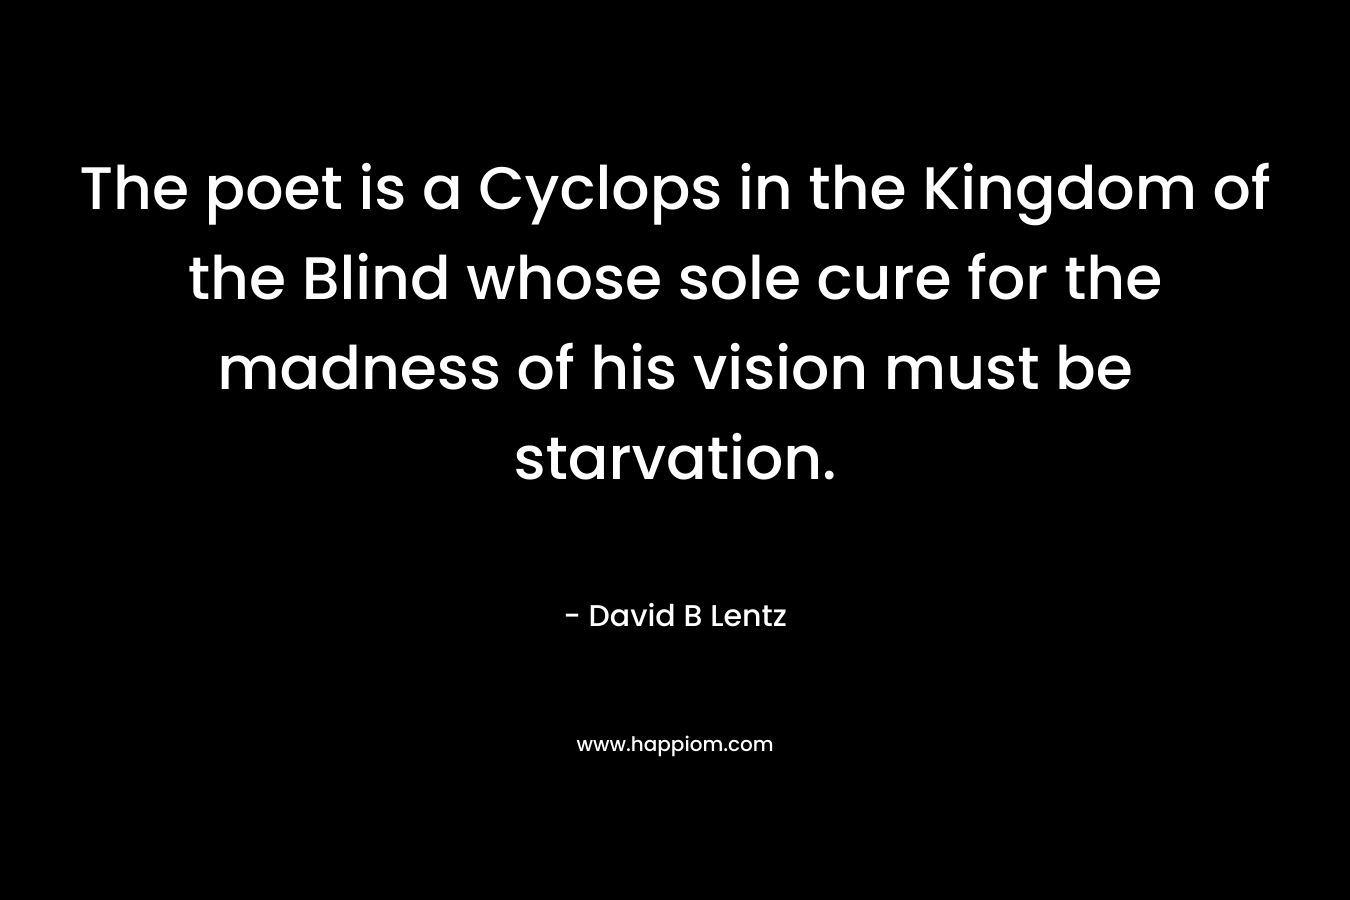 The poet is a Cyclops in the Kingdom of the Blind whose sole cure for the madness of his vision must be starvation. – David B Lentz